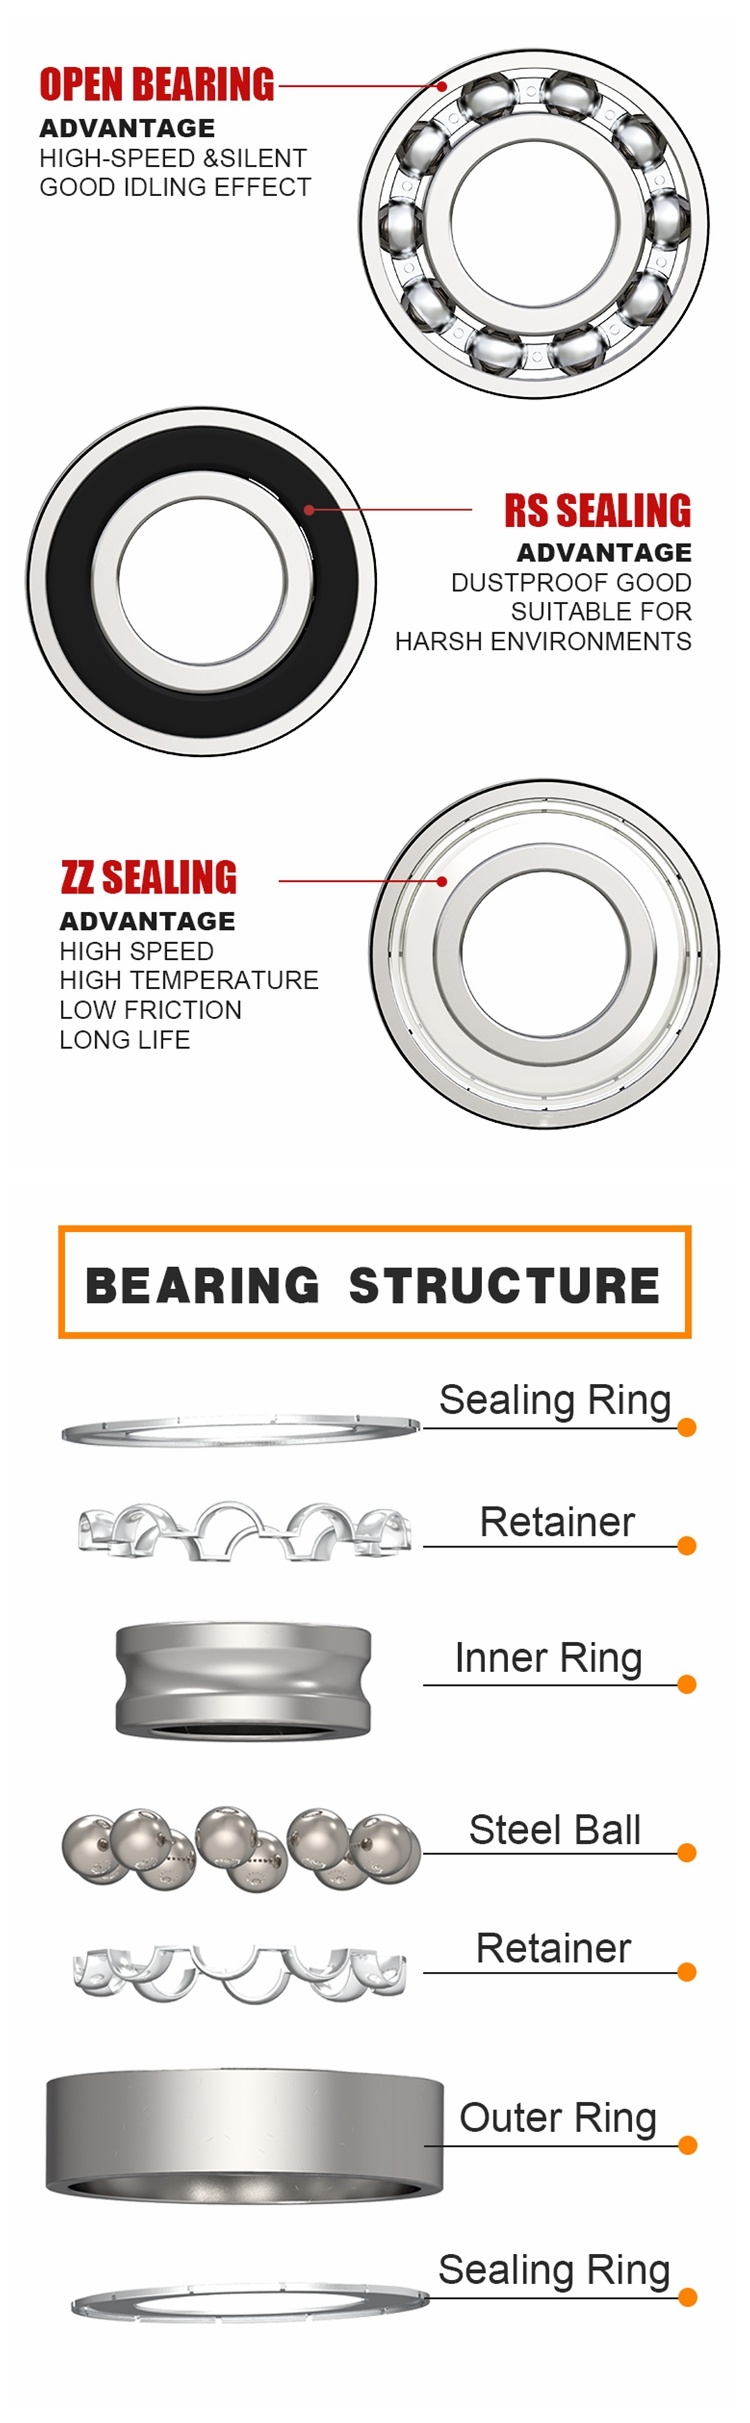 Motor Clearance Spindle Bearing Rubber Cover 6802 Zz Ball Bearings